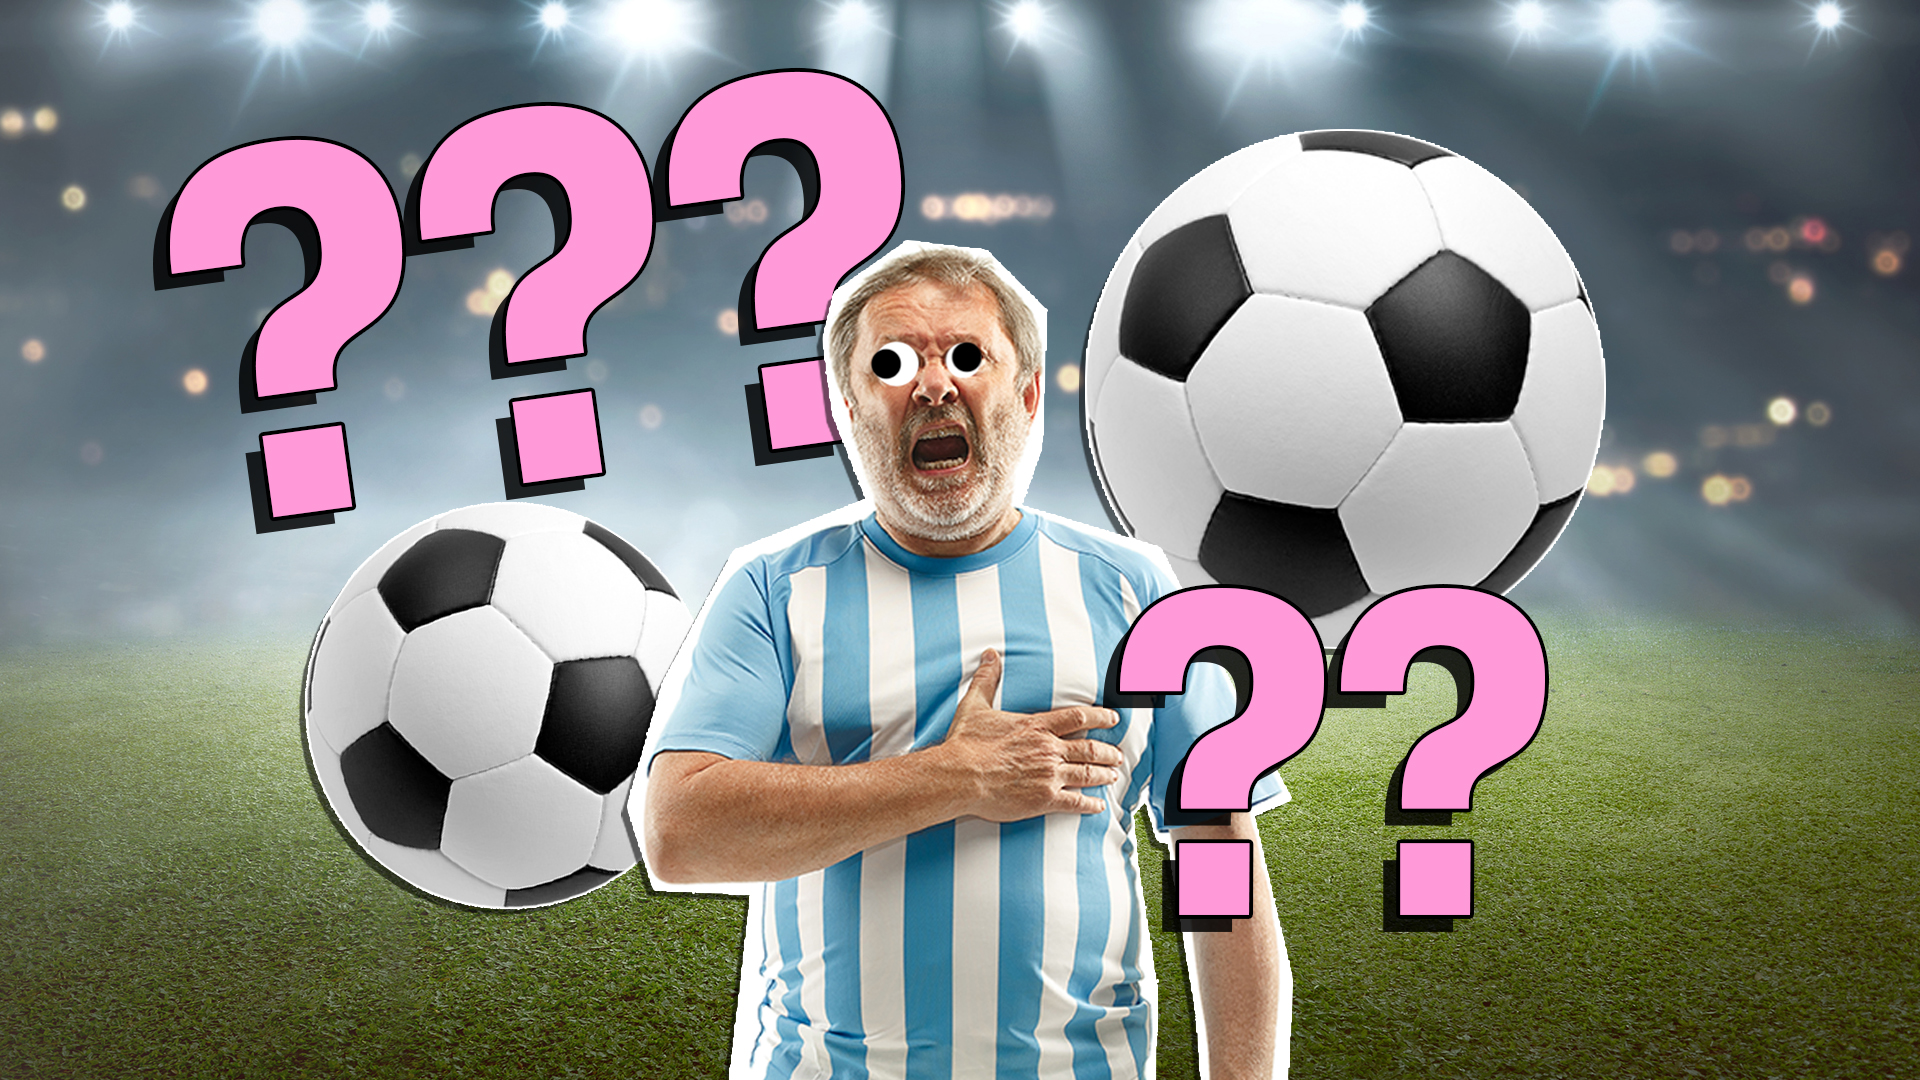 Guess the Football Club a Player Plays For! #football #soccer 